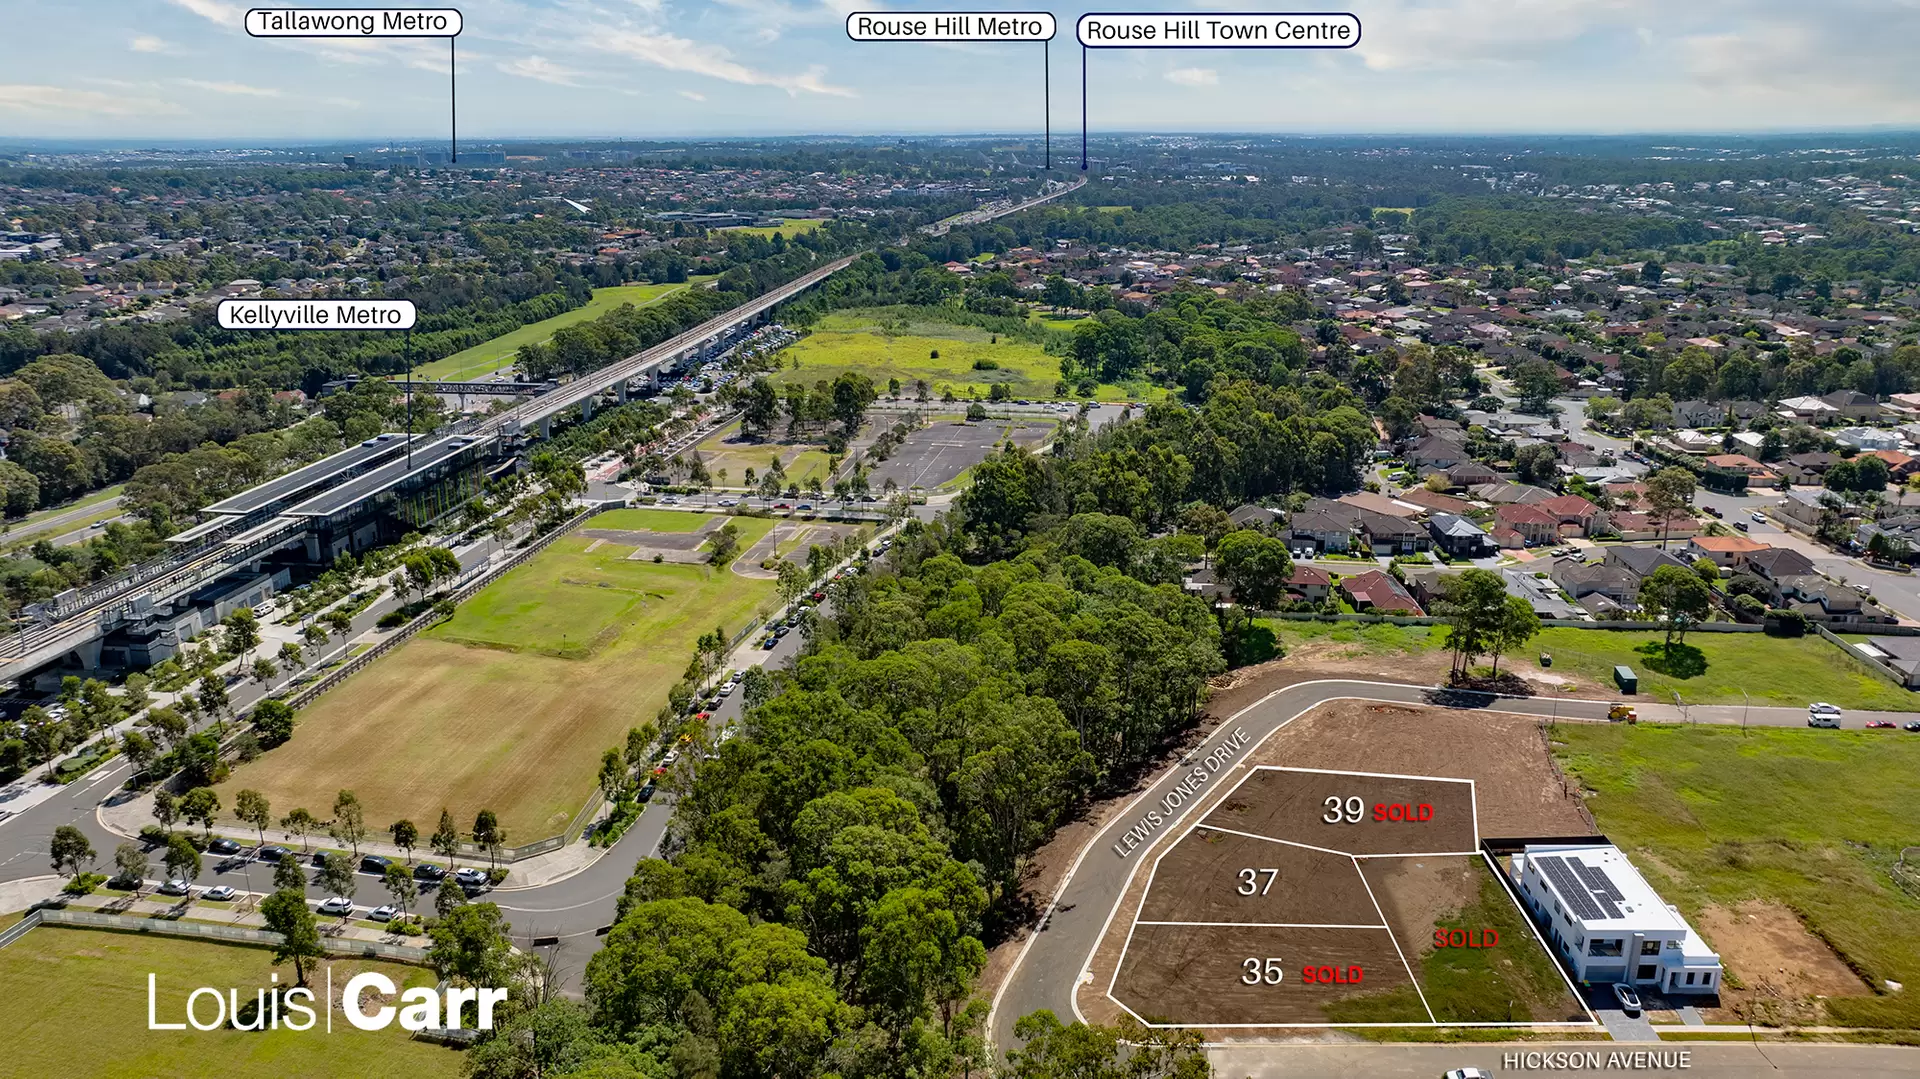 Lot 302,  Lewis Jones Drive, Kellyville Sold by Louis Carr Real Estate - image 1